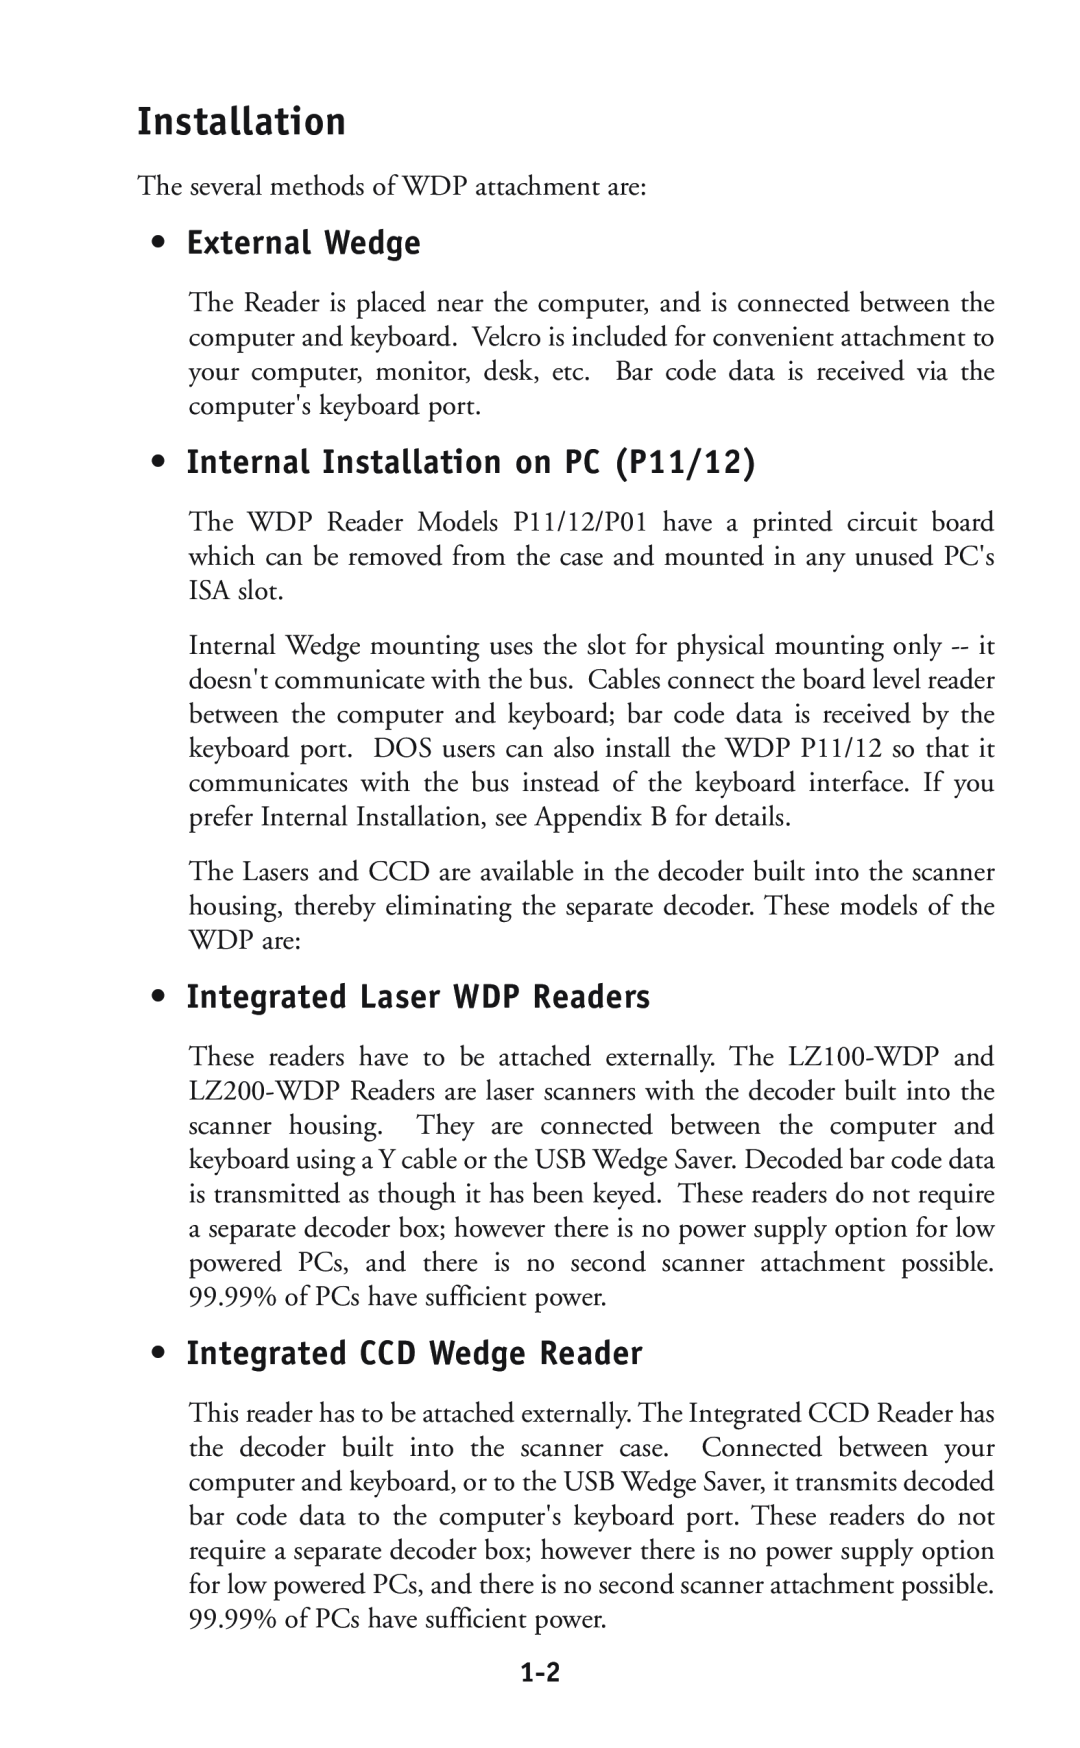 Worth Data user manual External Wedge, Internal Installation on PC P11/12, Integrated Laser WDP Readers 